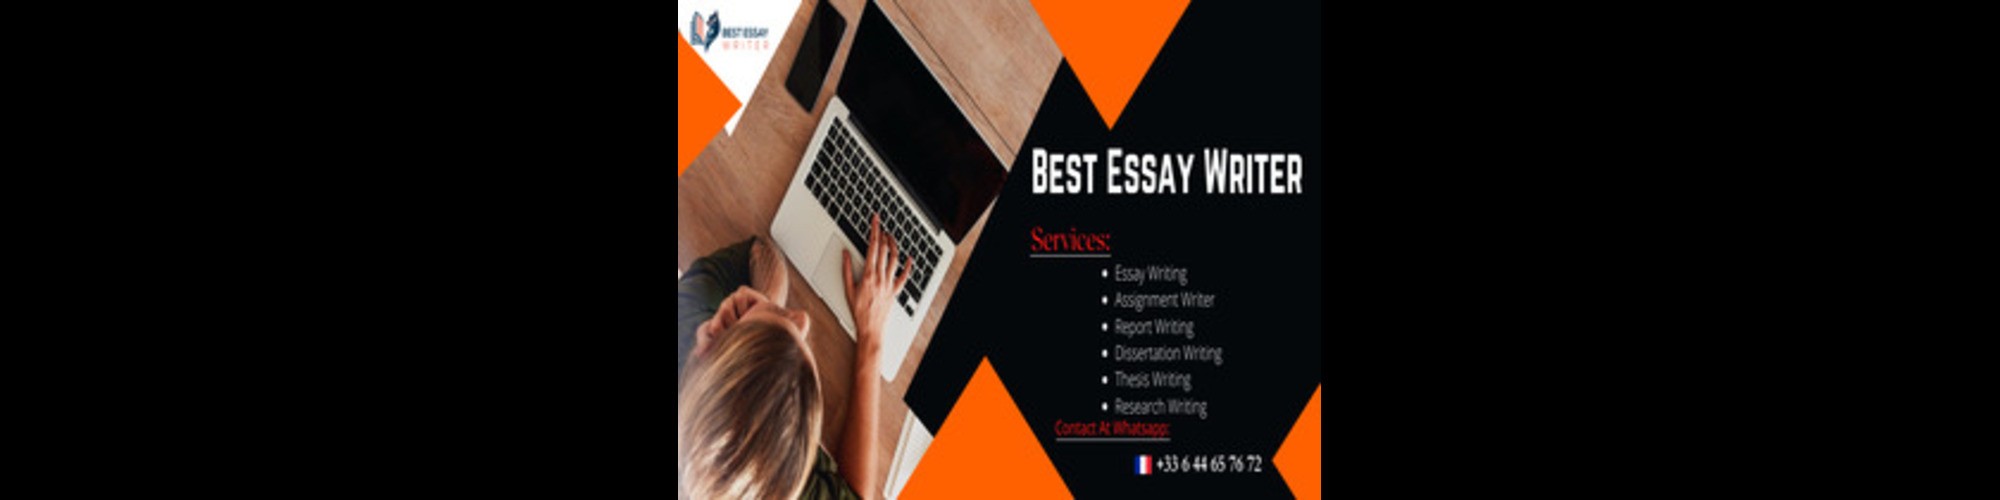 Best Essay Writer cover image